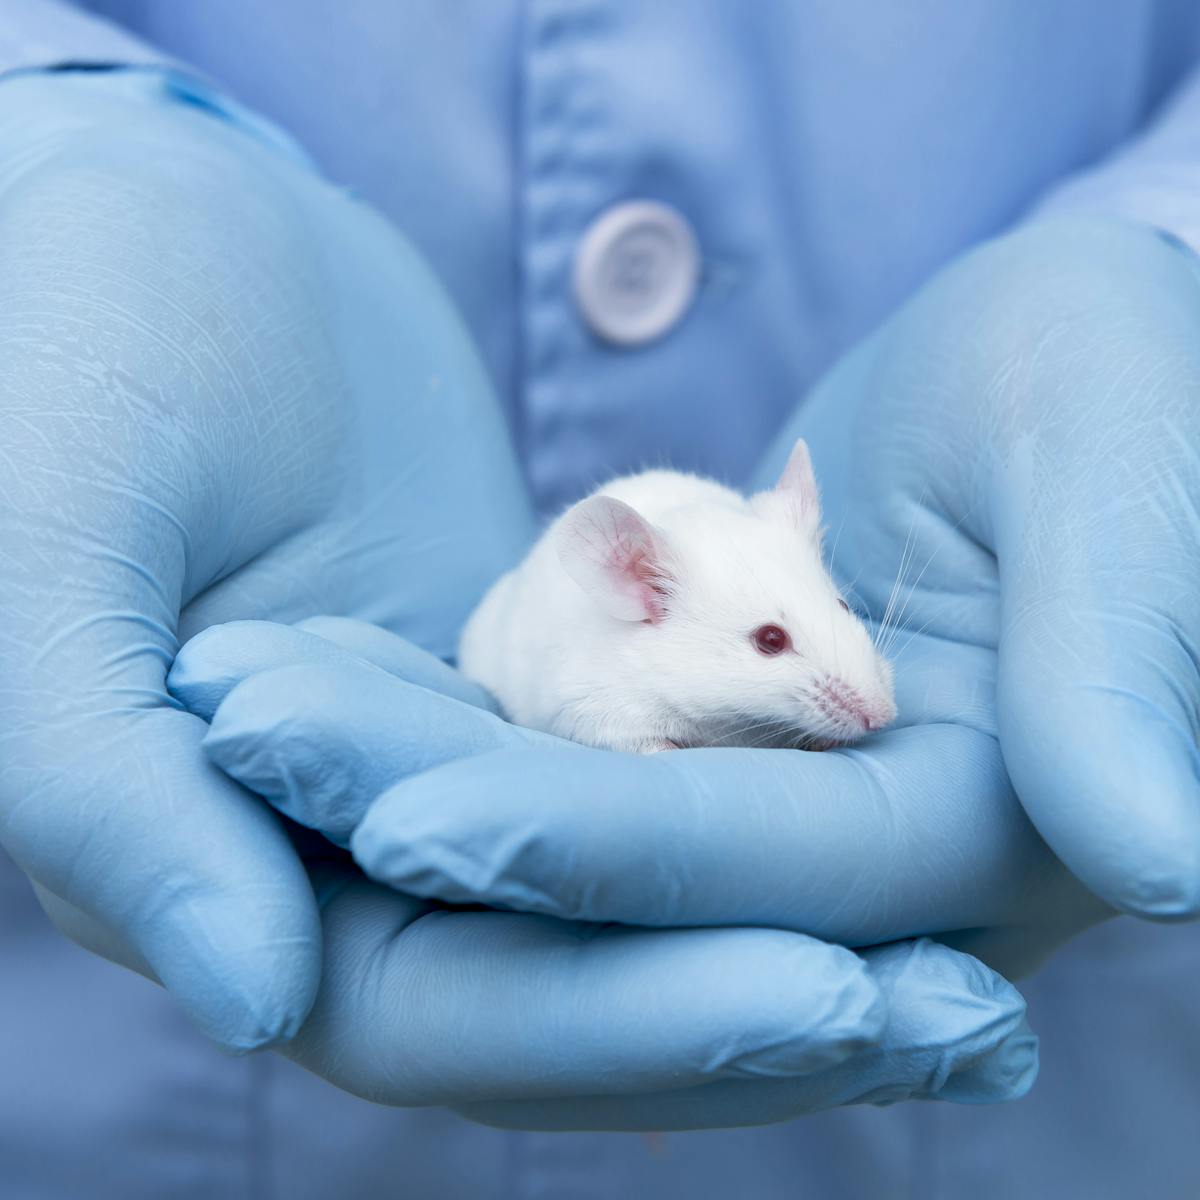 Breakthrough could end animal testing in carcinogen research